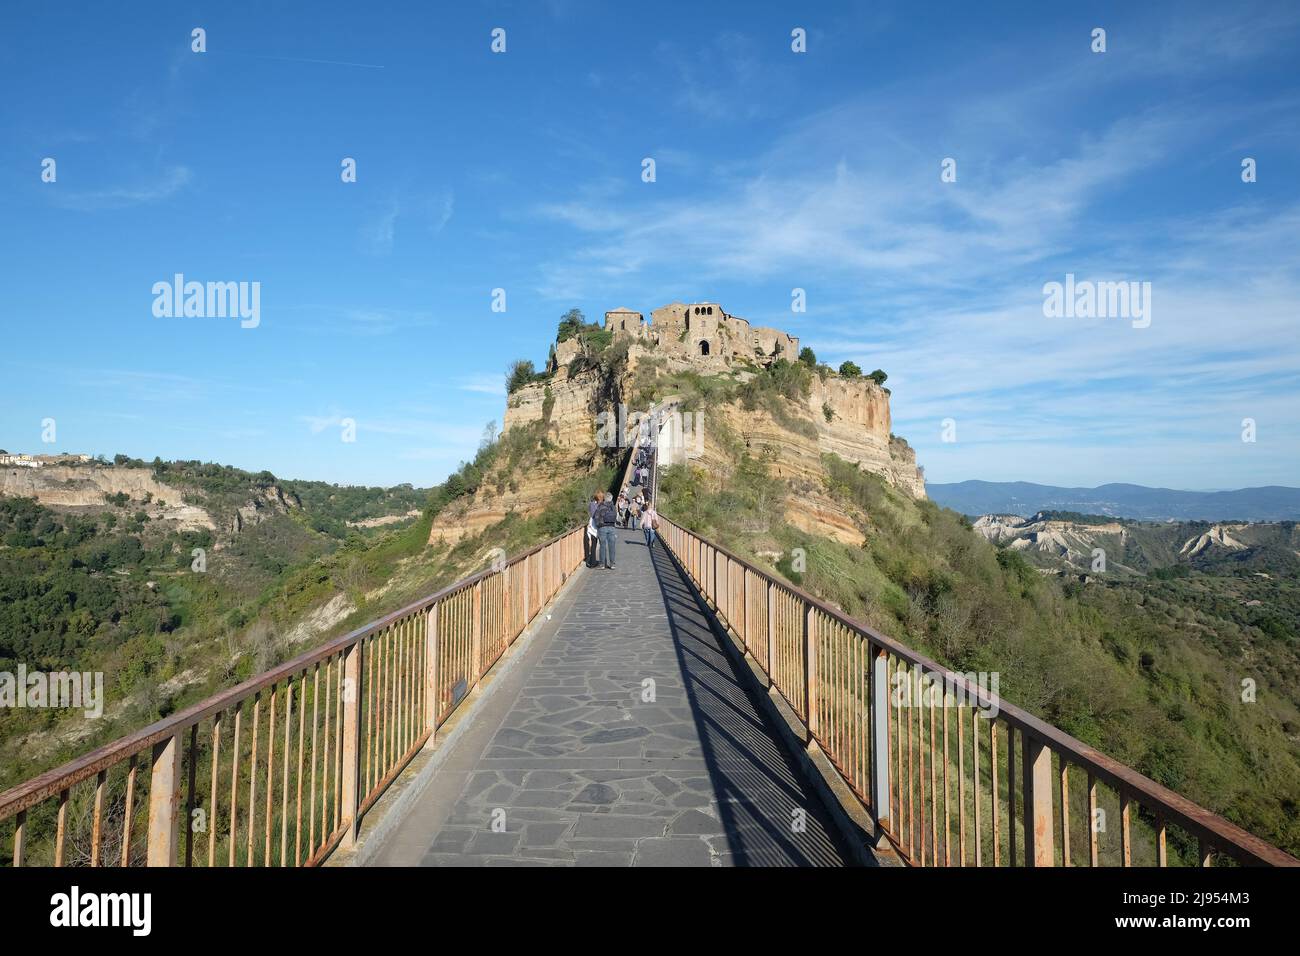 Tourists at the Civita di Bagnoregio, Lazio, Italy. Panoramic view of Medieval town on the mountain. Stock Photo